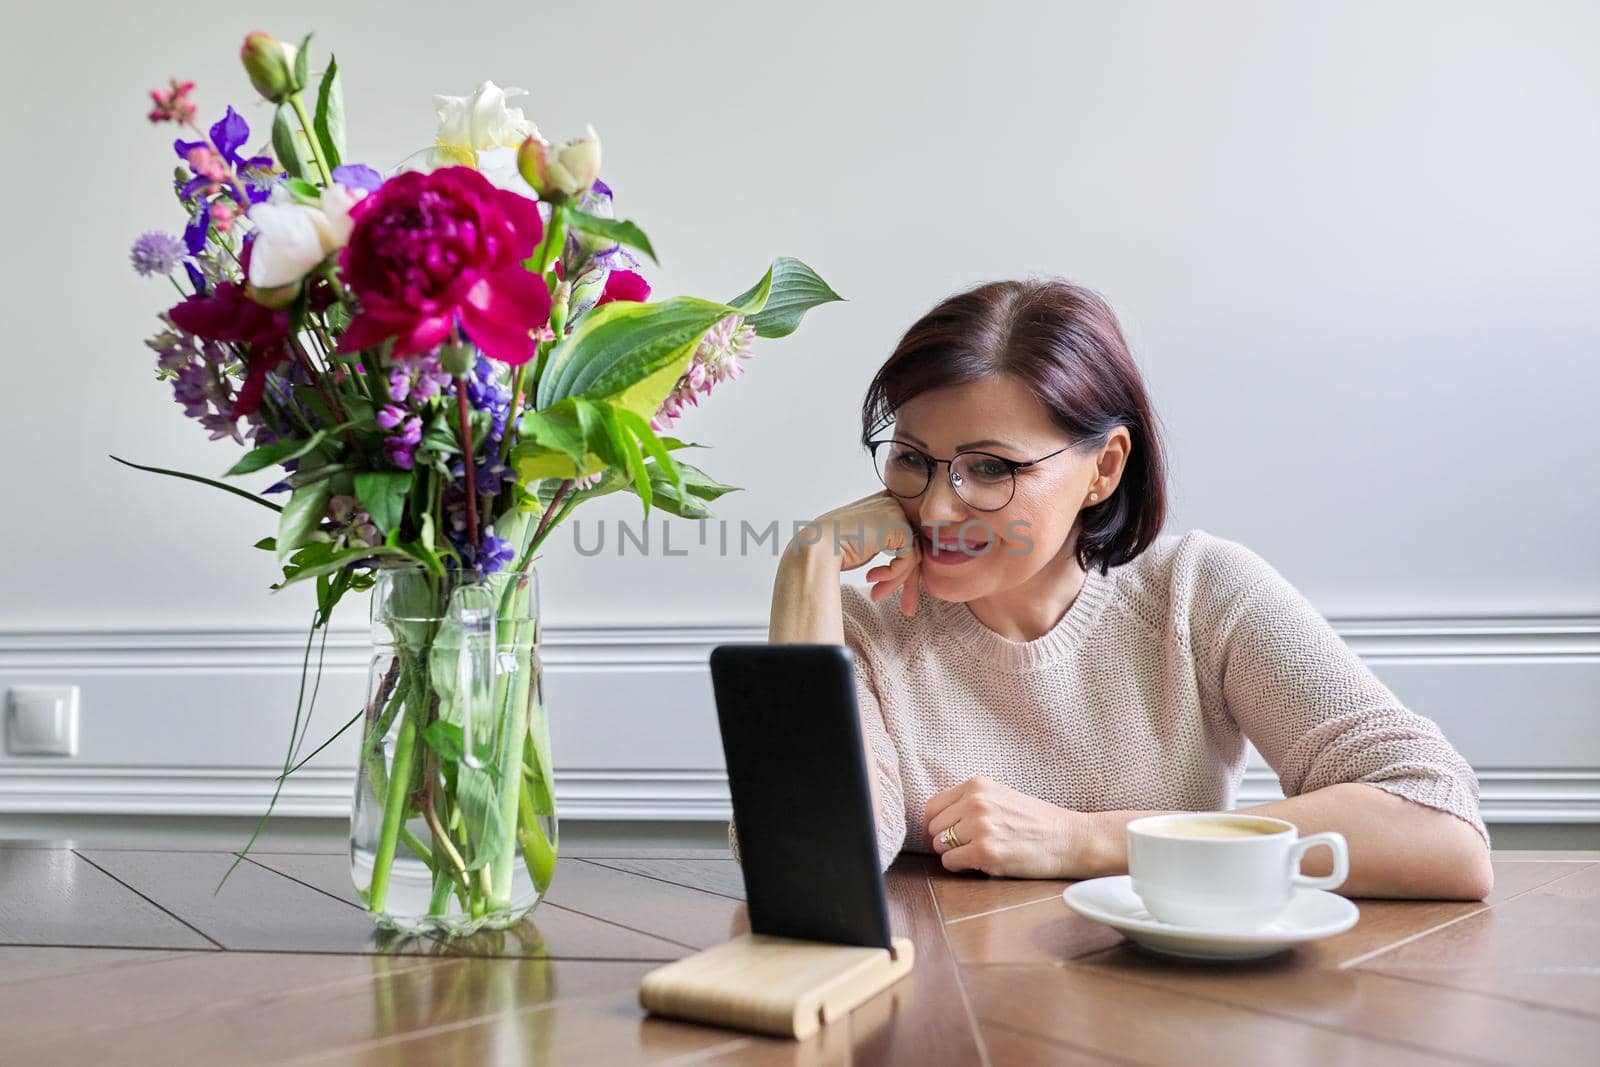 Middle-aged woman sitting at table looking at smartphone screen, female relaxing with cup of coffee, using technologies for relaxation. Lifestyle, people of mature age, home, technology concept